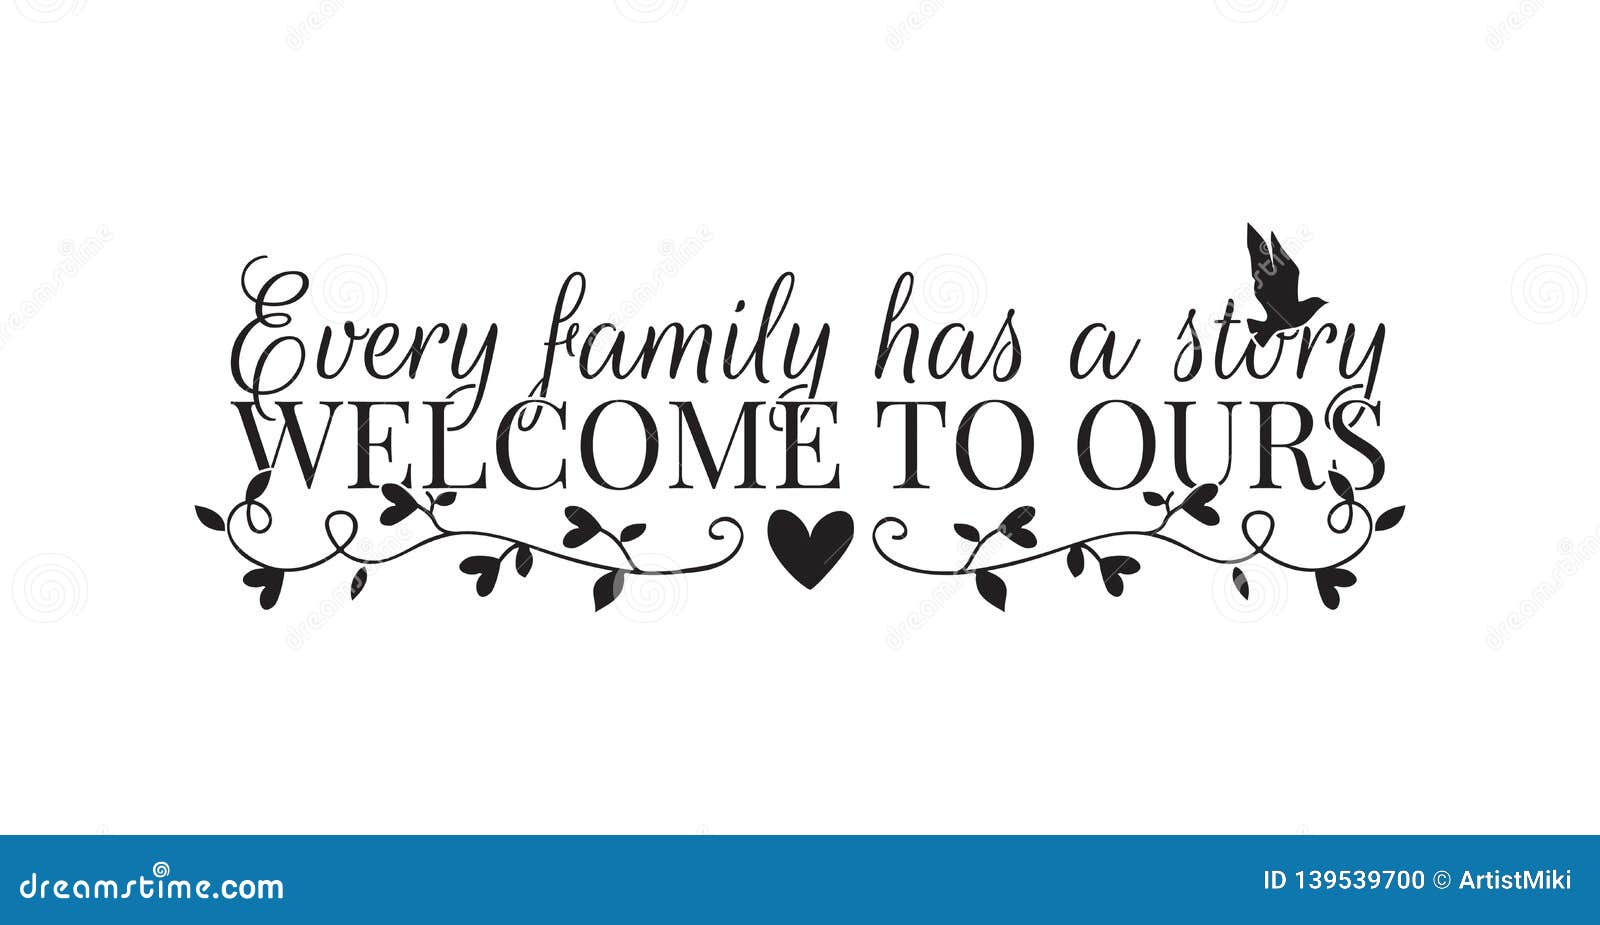 Download Wall Decals, Every Family Has A Story, Welcome To Ours ...